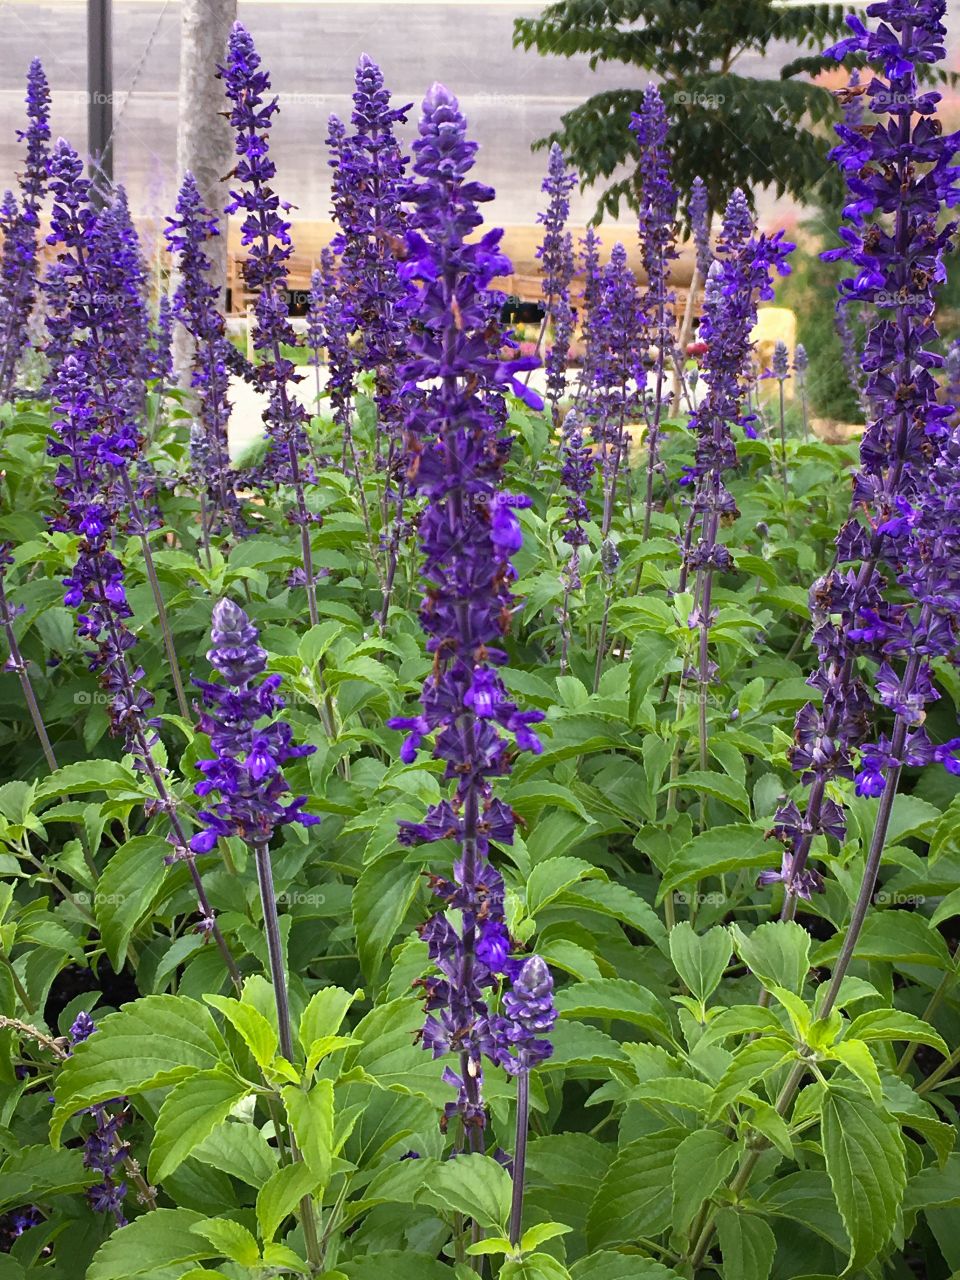 I don’t know if it’s a Salvia or lavender but I know is beautiful and with a vibrant purple!